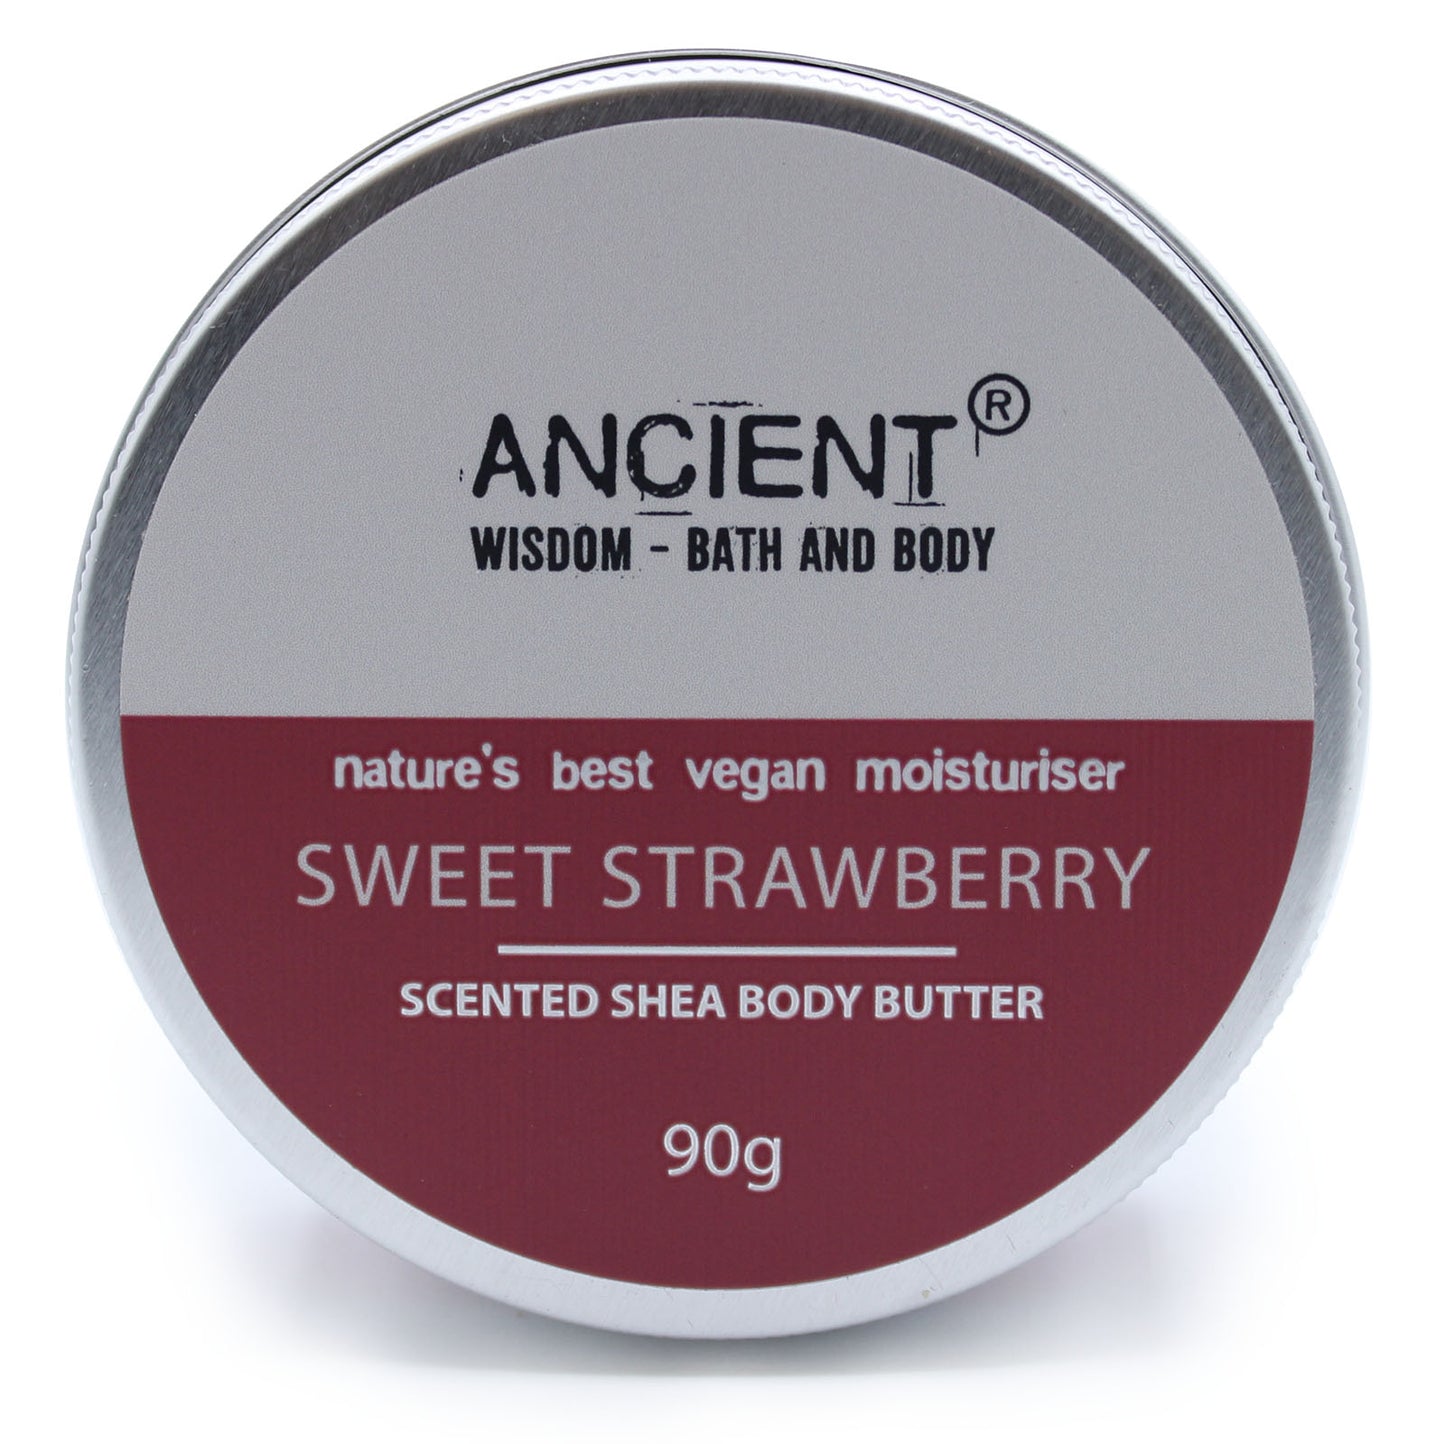 Scented Shea Body Butter - Sweet Strawberry